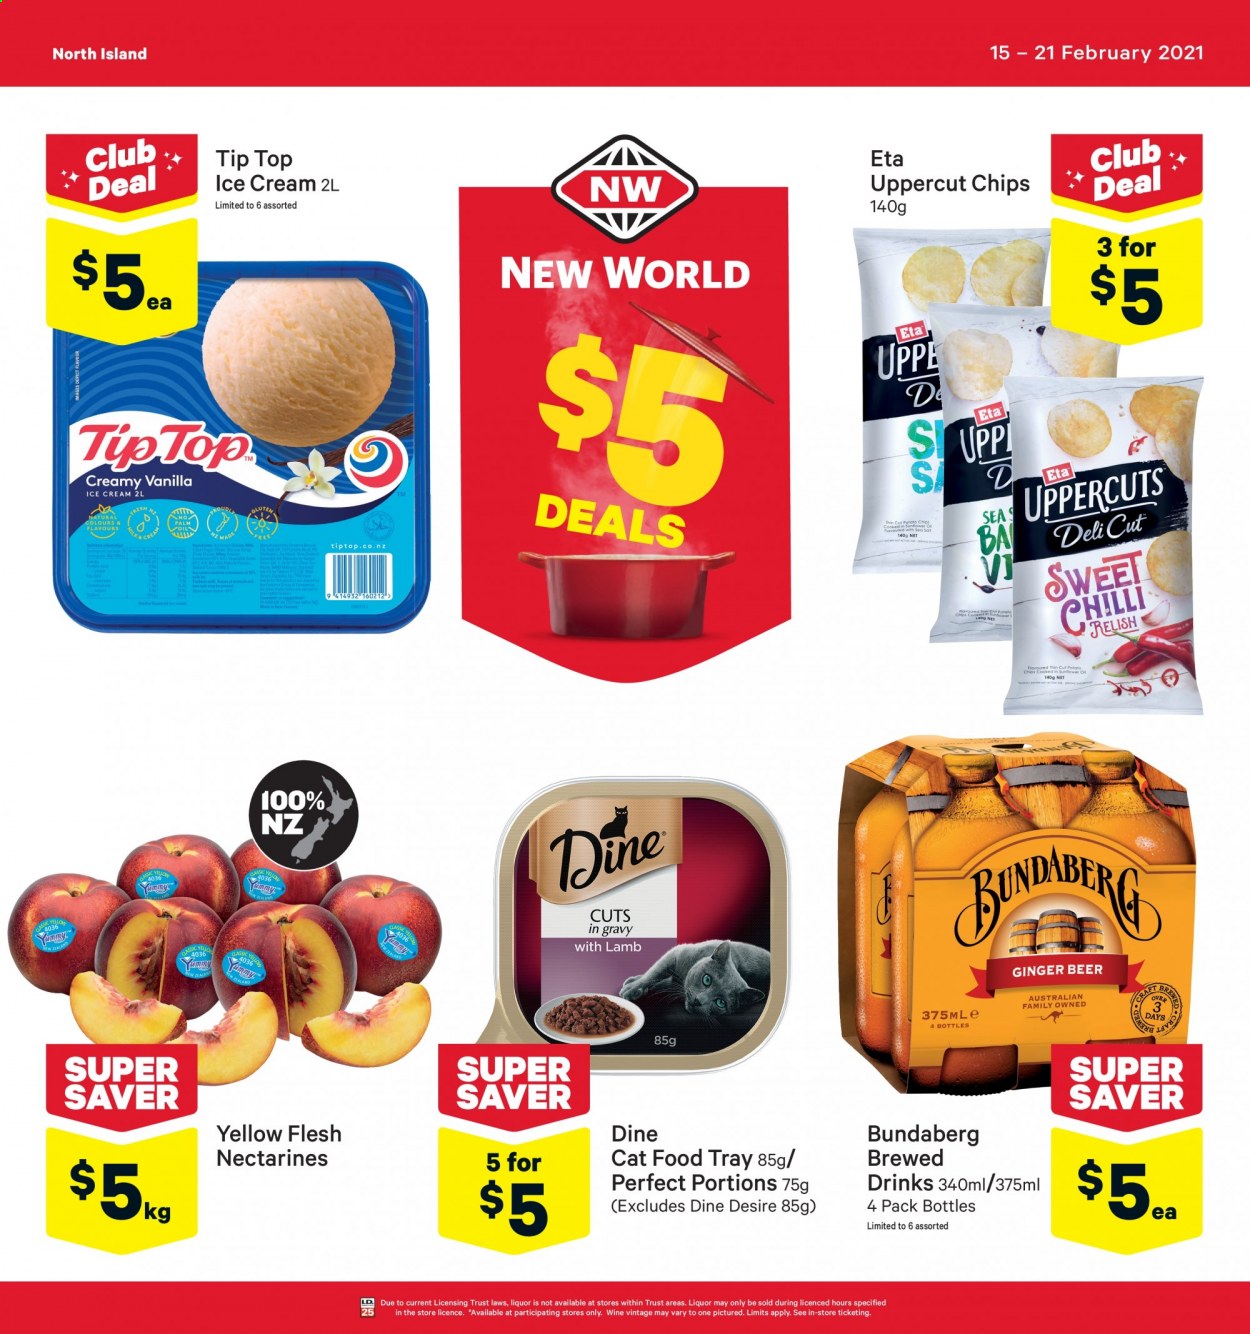 thumbnail - New World mailer - 15.02.2021 - 21.02.2021 - Sales products - ginger beer, nectarines, ice cream, chips, oil, Bundaberg, wine, liquor, beer. Page 1.